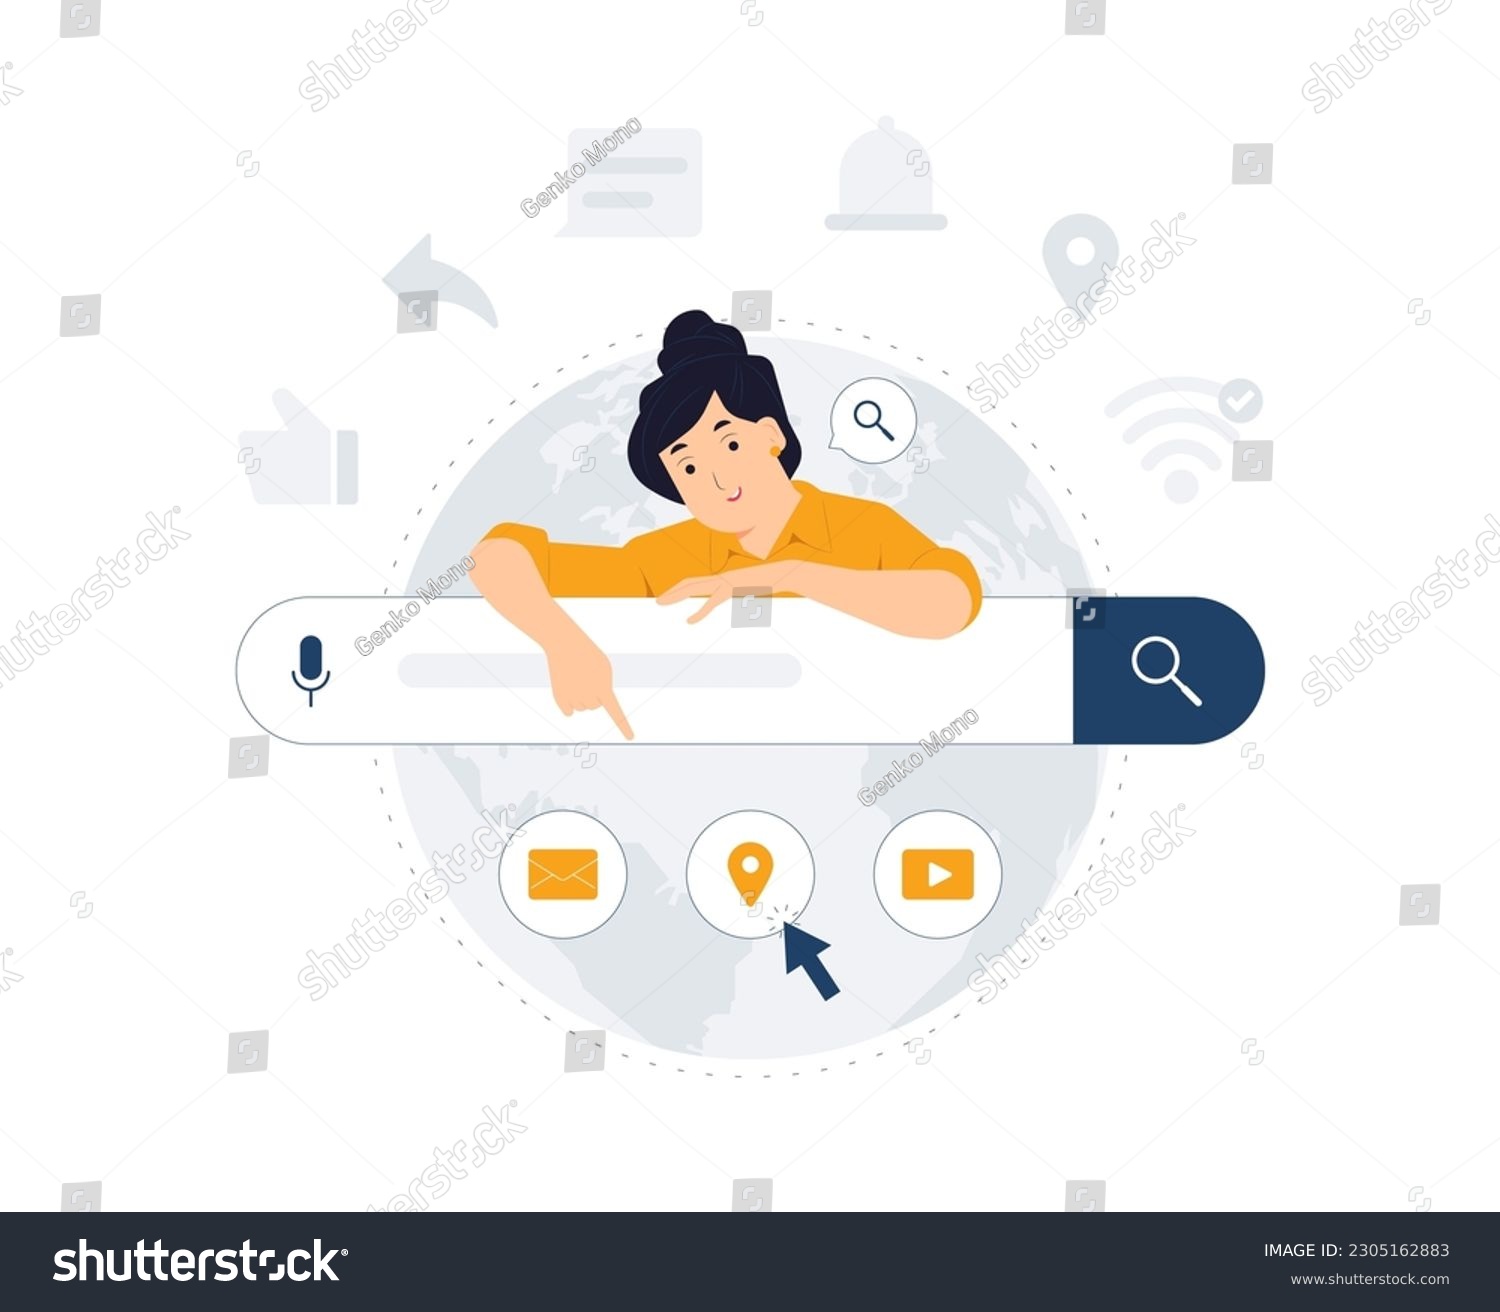 Search engine, browsing, online, search bars, seo analytic. Woman pointing at web browser online search engine bars seo optimization concept illustration #2305162883